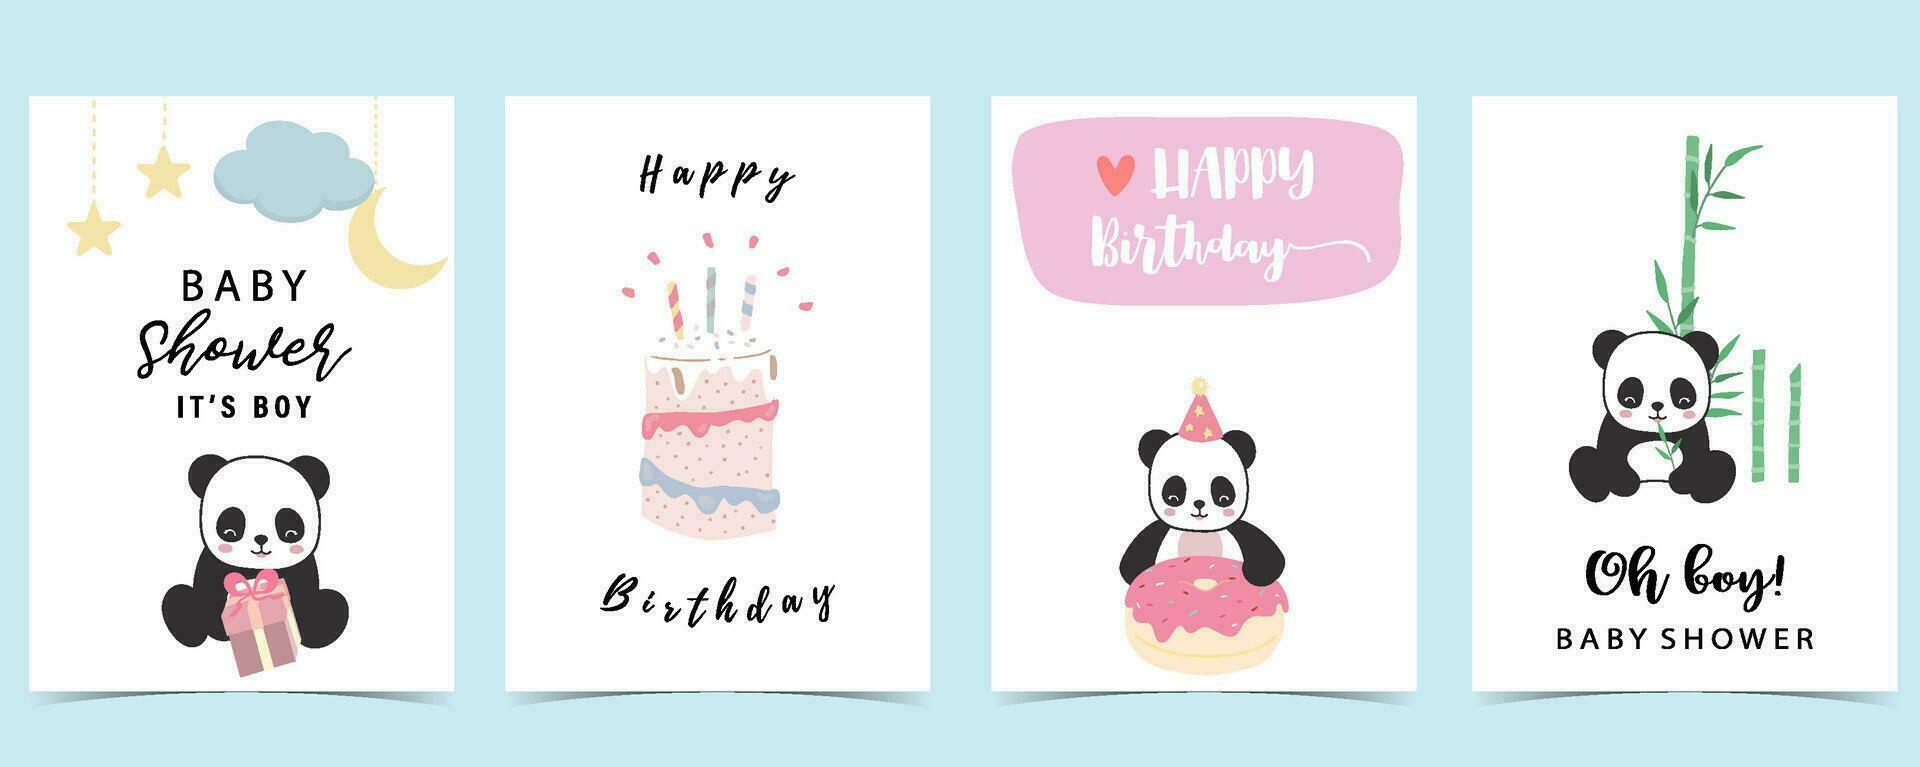 Baby shower invitation card for boy with panda, cake,bamboo, sky vector